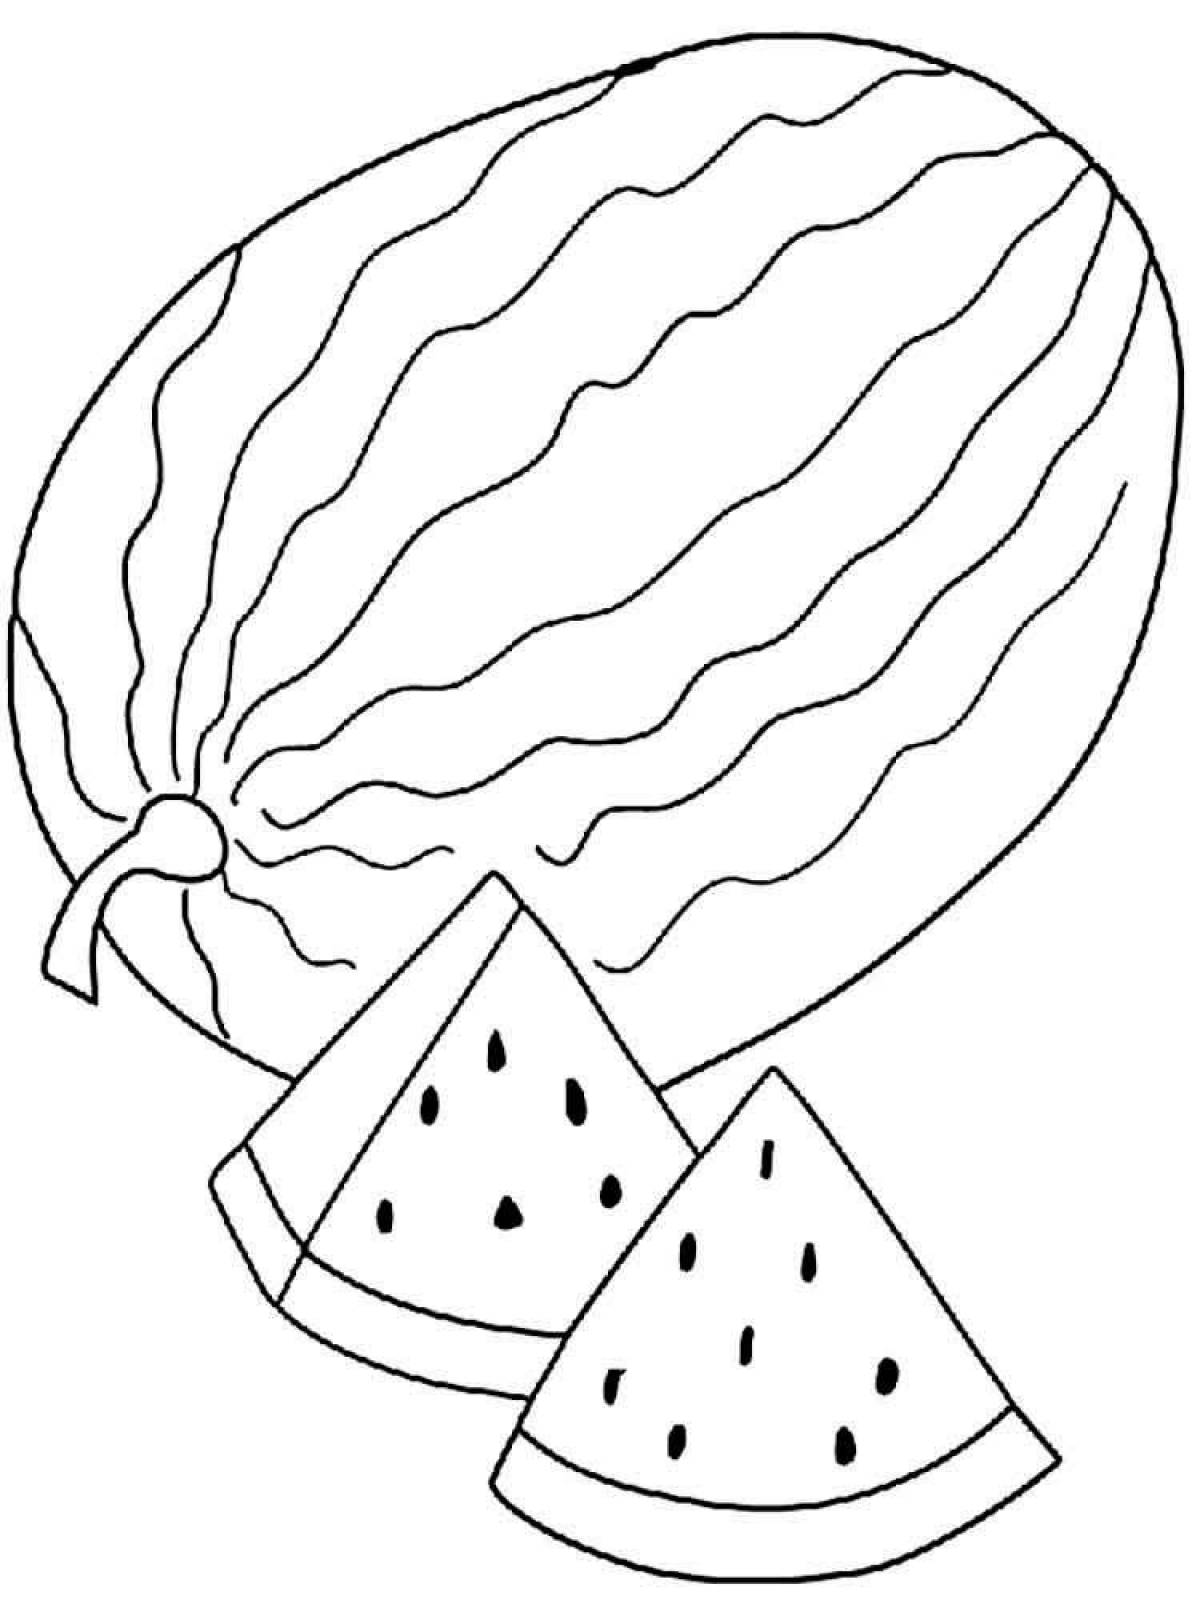 Amazing coloring pages with watermelons for kids